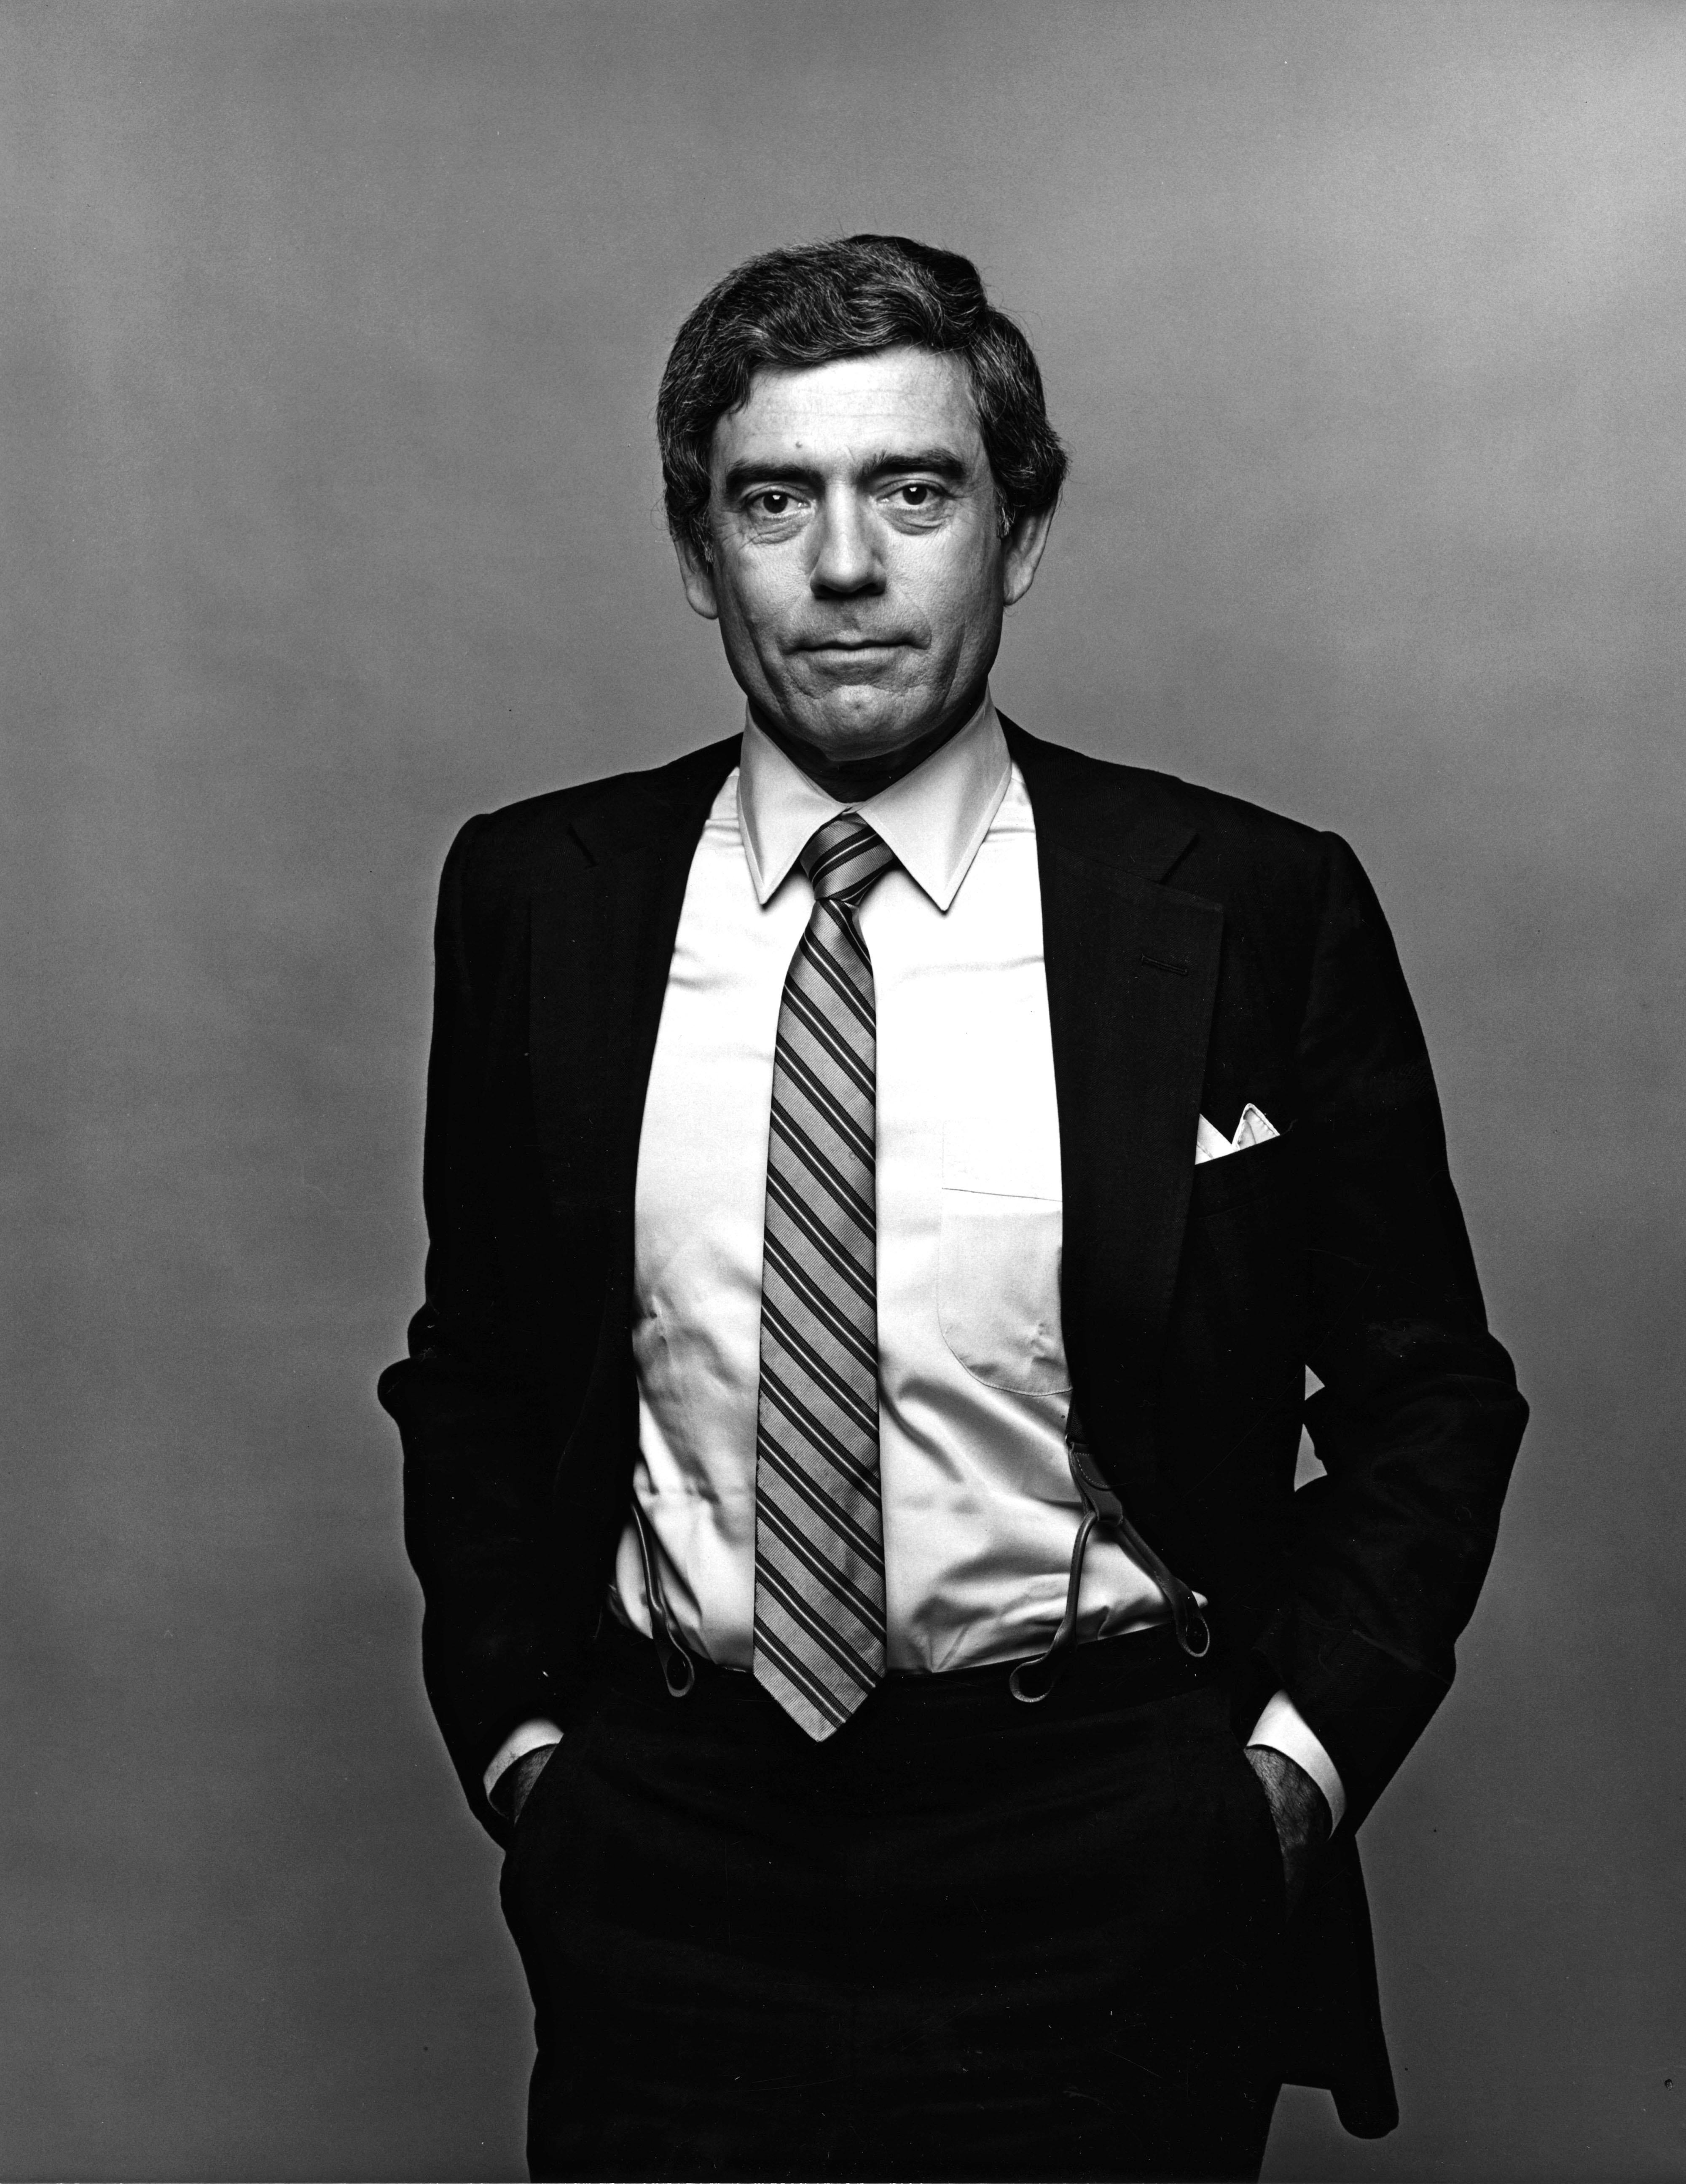 Jack Mitchell Black and White Photograph - CBS News anchor Dan Rather